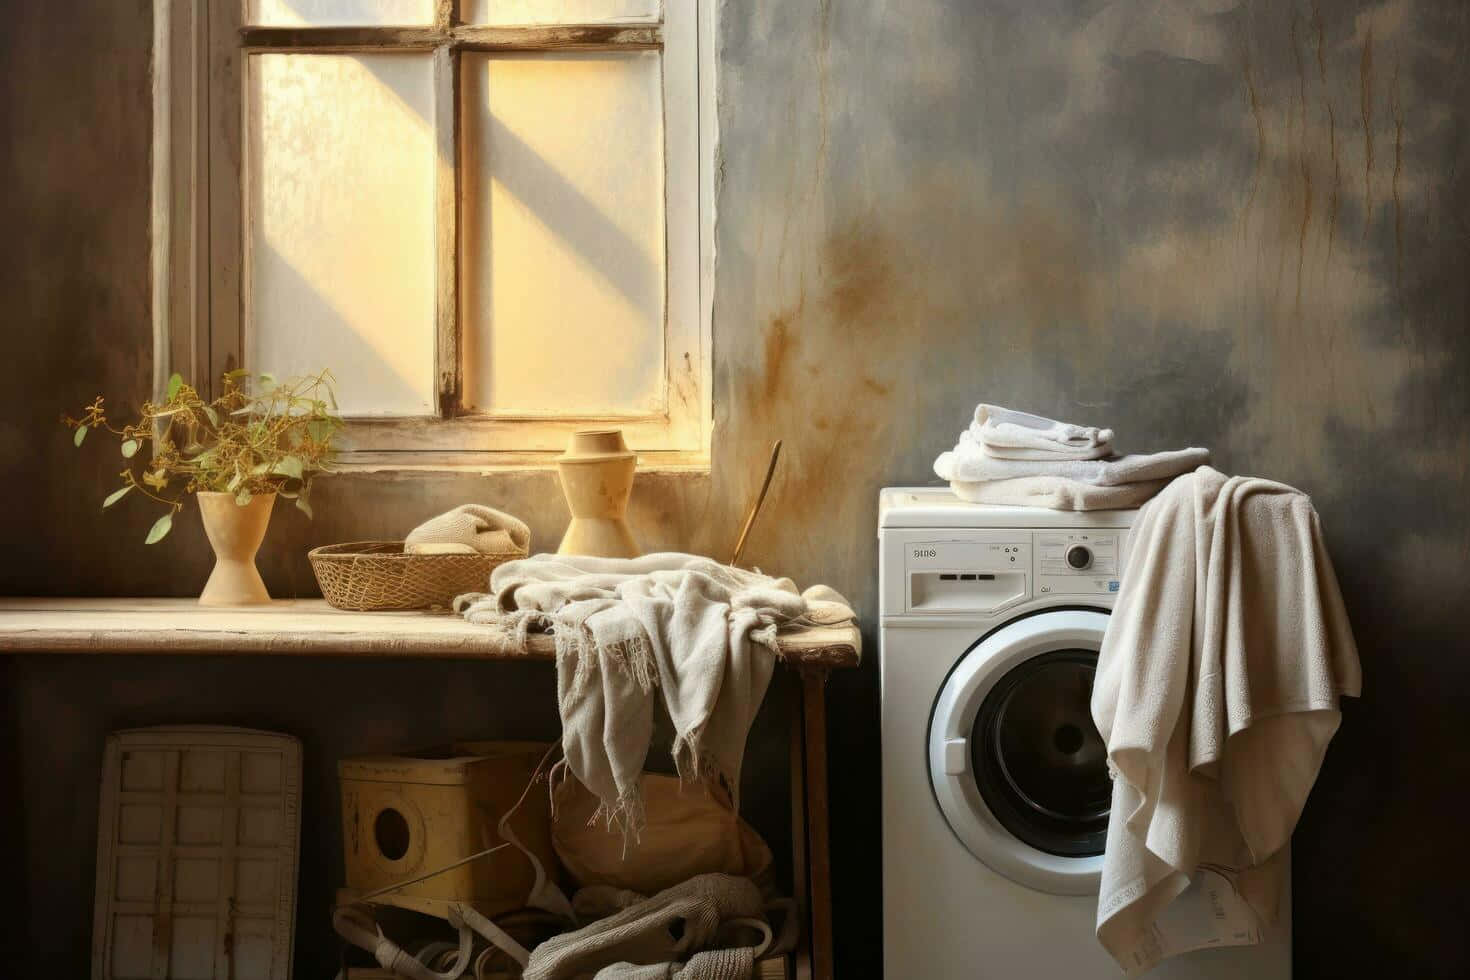 Rustic Laundry Roomwith Washing Machine